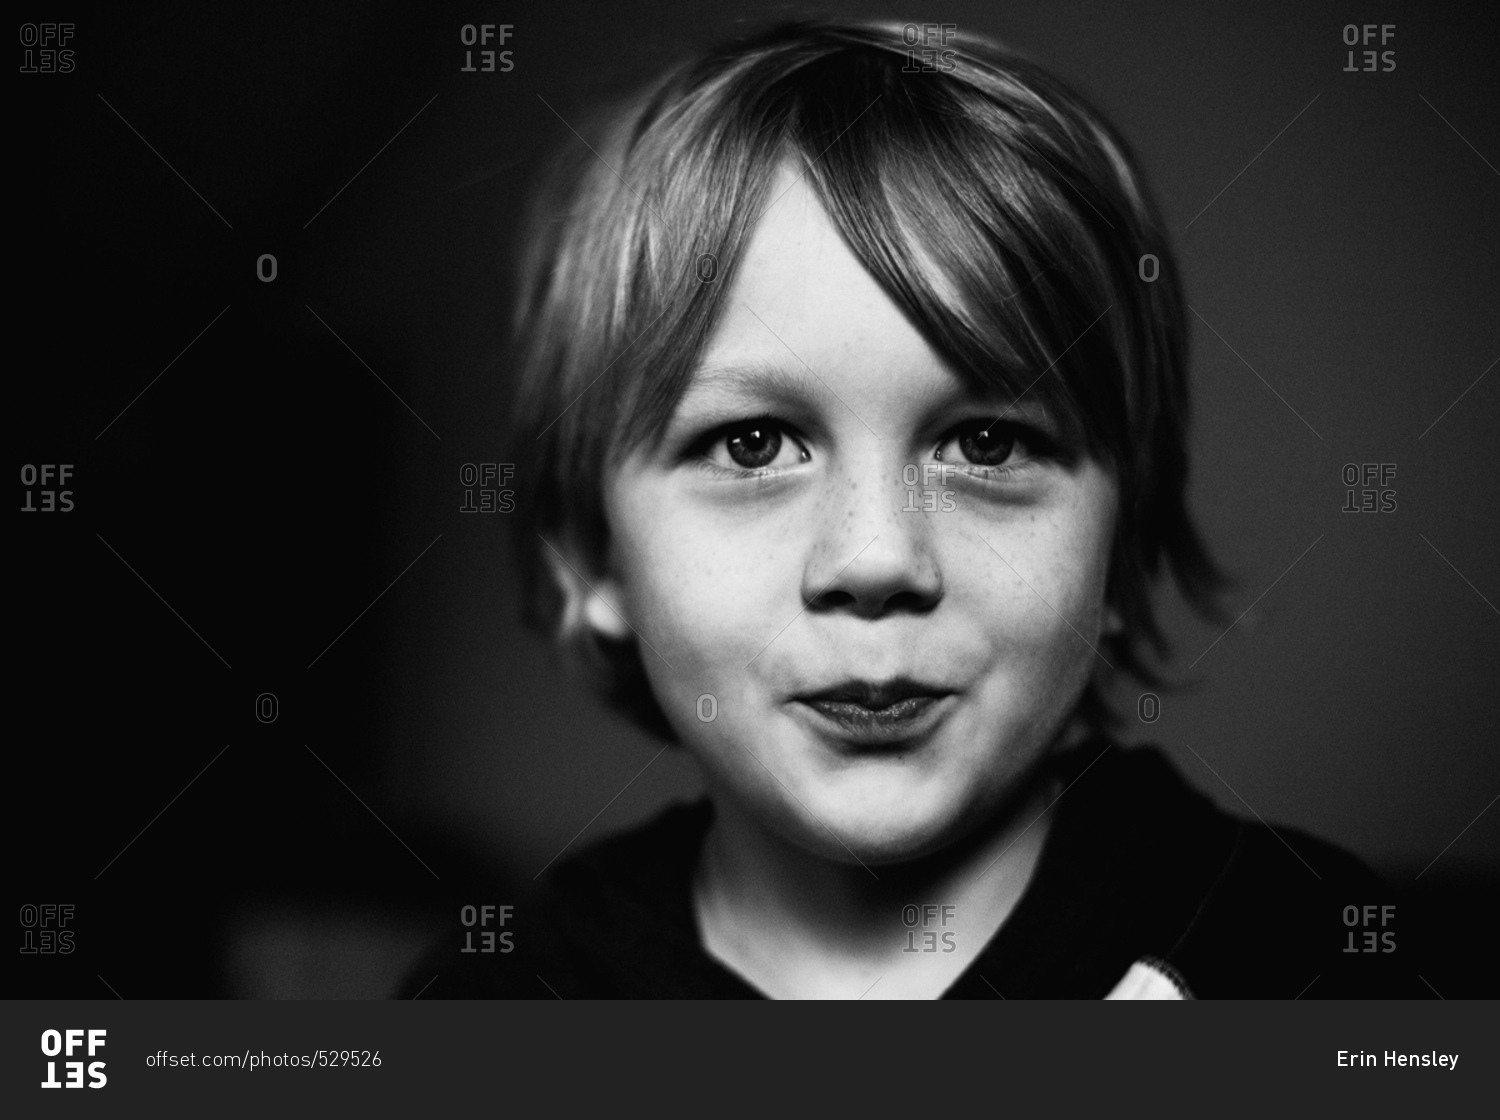 Smiling boy in black and white